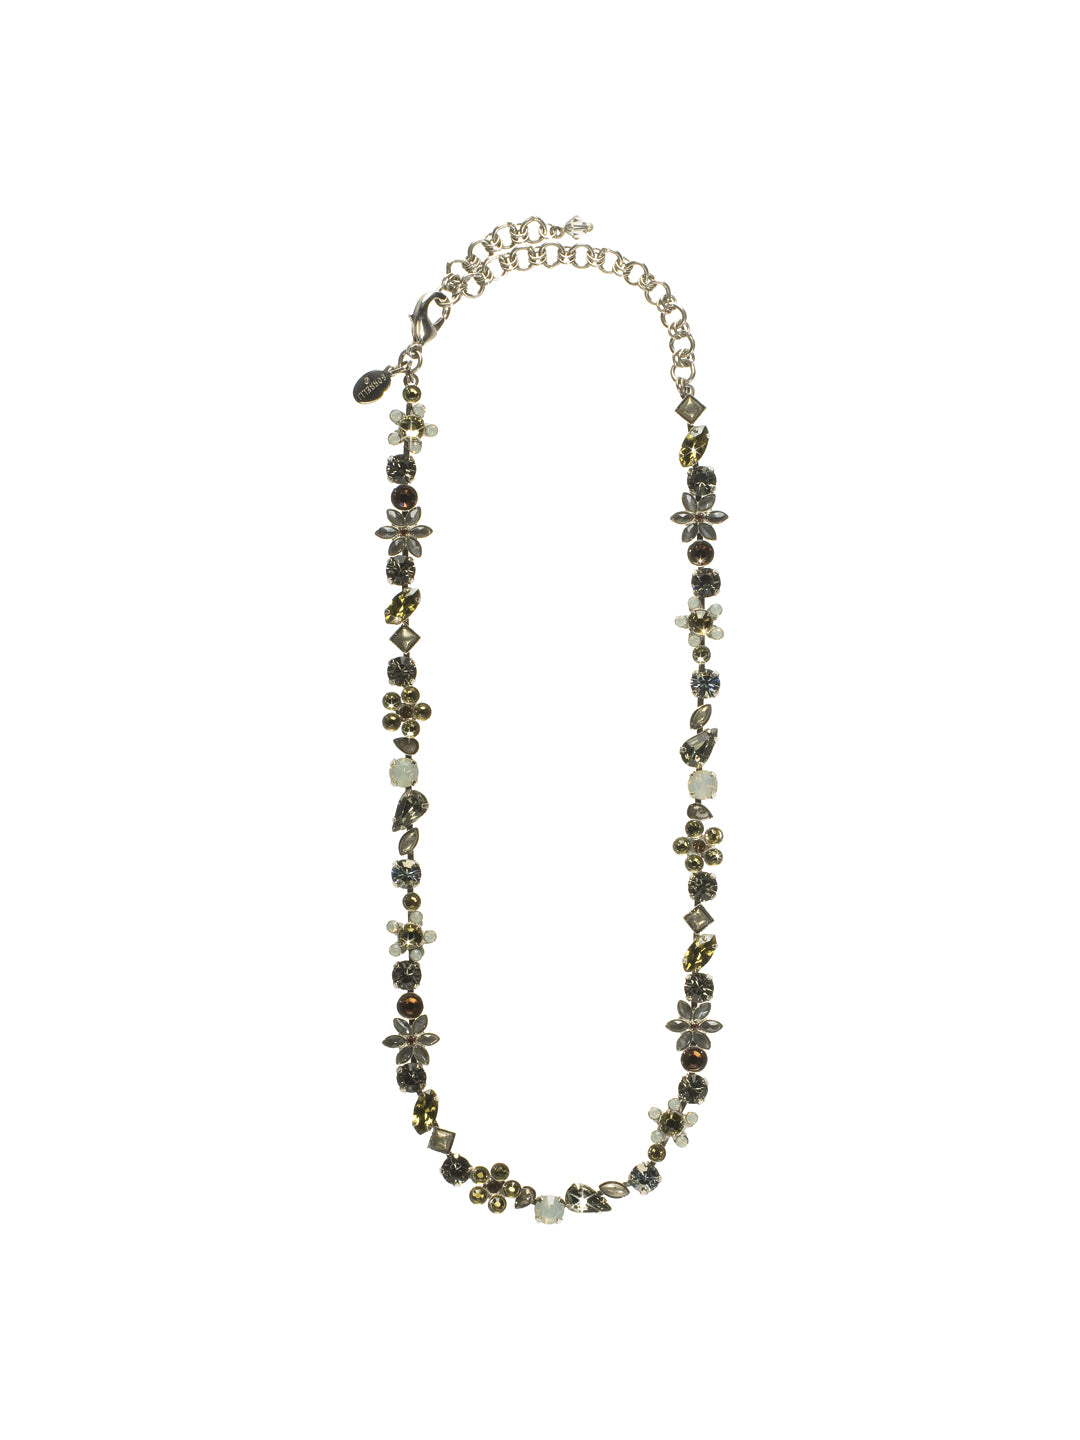 Classic Crystal and Opaque Stone Floral Tennis Necklace - NBL12ASCJ